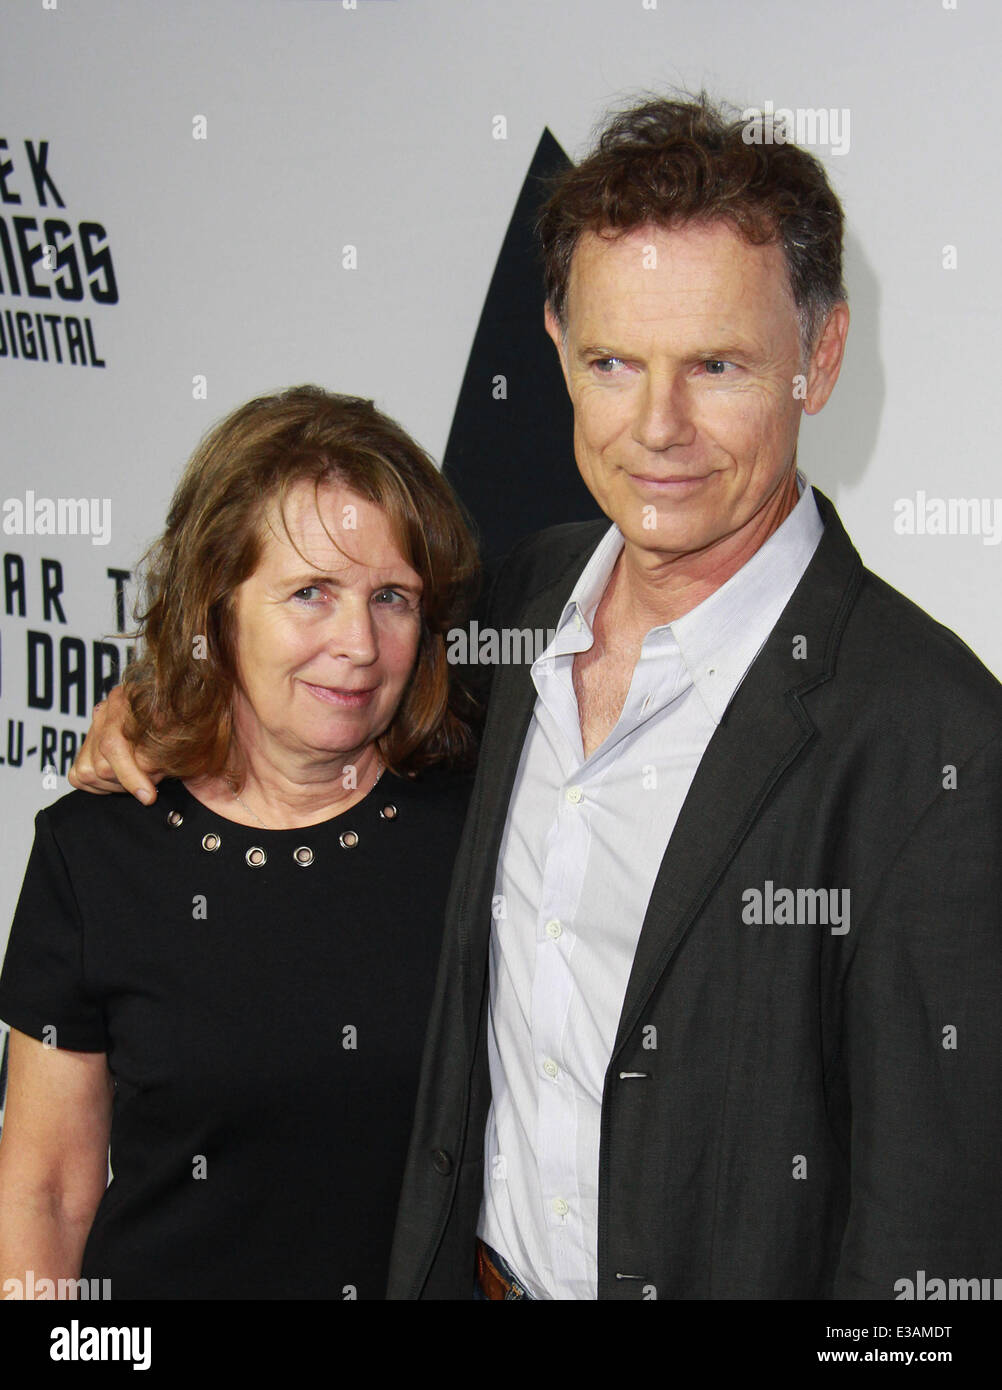 Paramount Pictures Celebrates The Blu-ray And DVD Debut Of 'Star Trek: Into Darkness' Held at California Science Center  Featuring: Susan Devlin,Bruce Greenwood Where: Los Angeles, California, United States When: 11 Sep 2013 Stock Photo